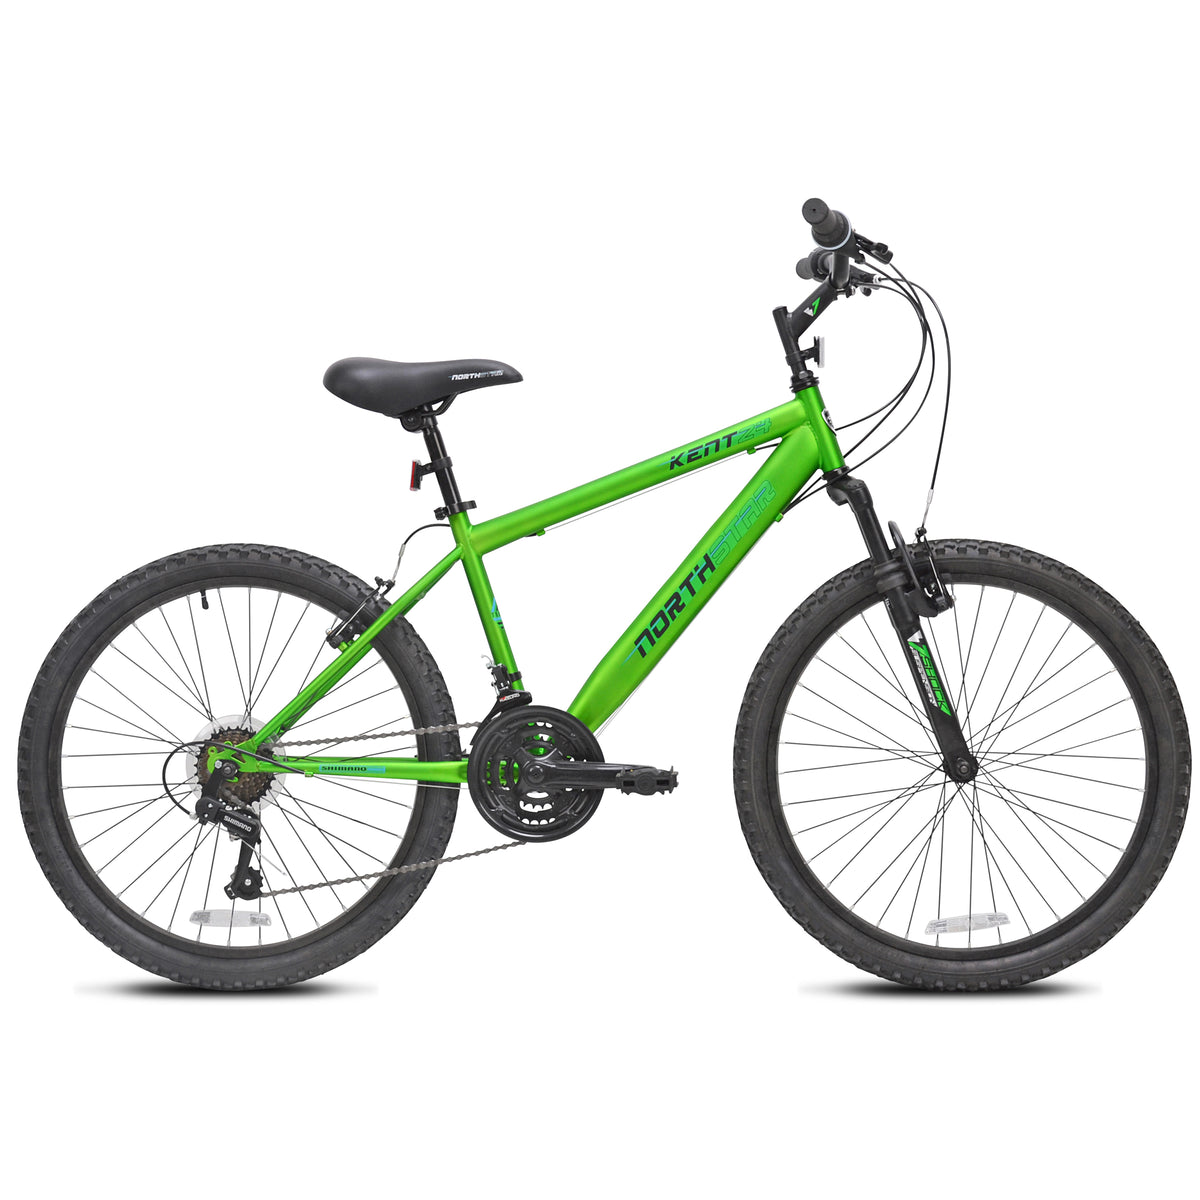 24" Kent Northstar | Mountain Bike for Kids Ages 8+